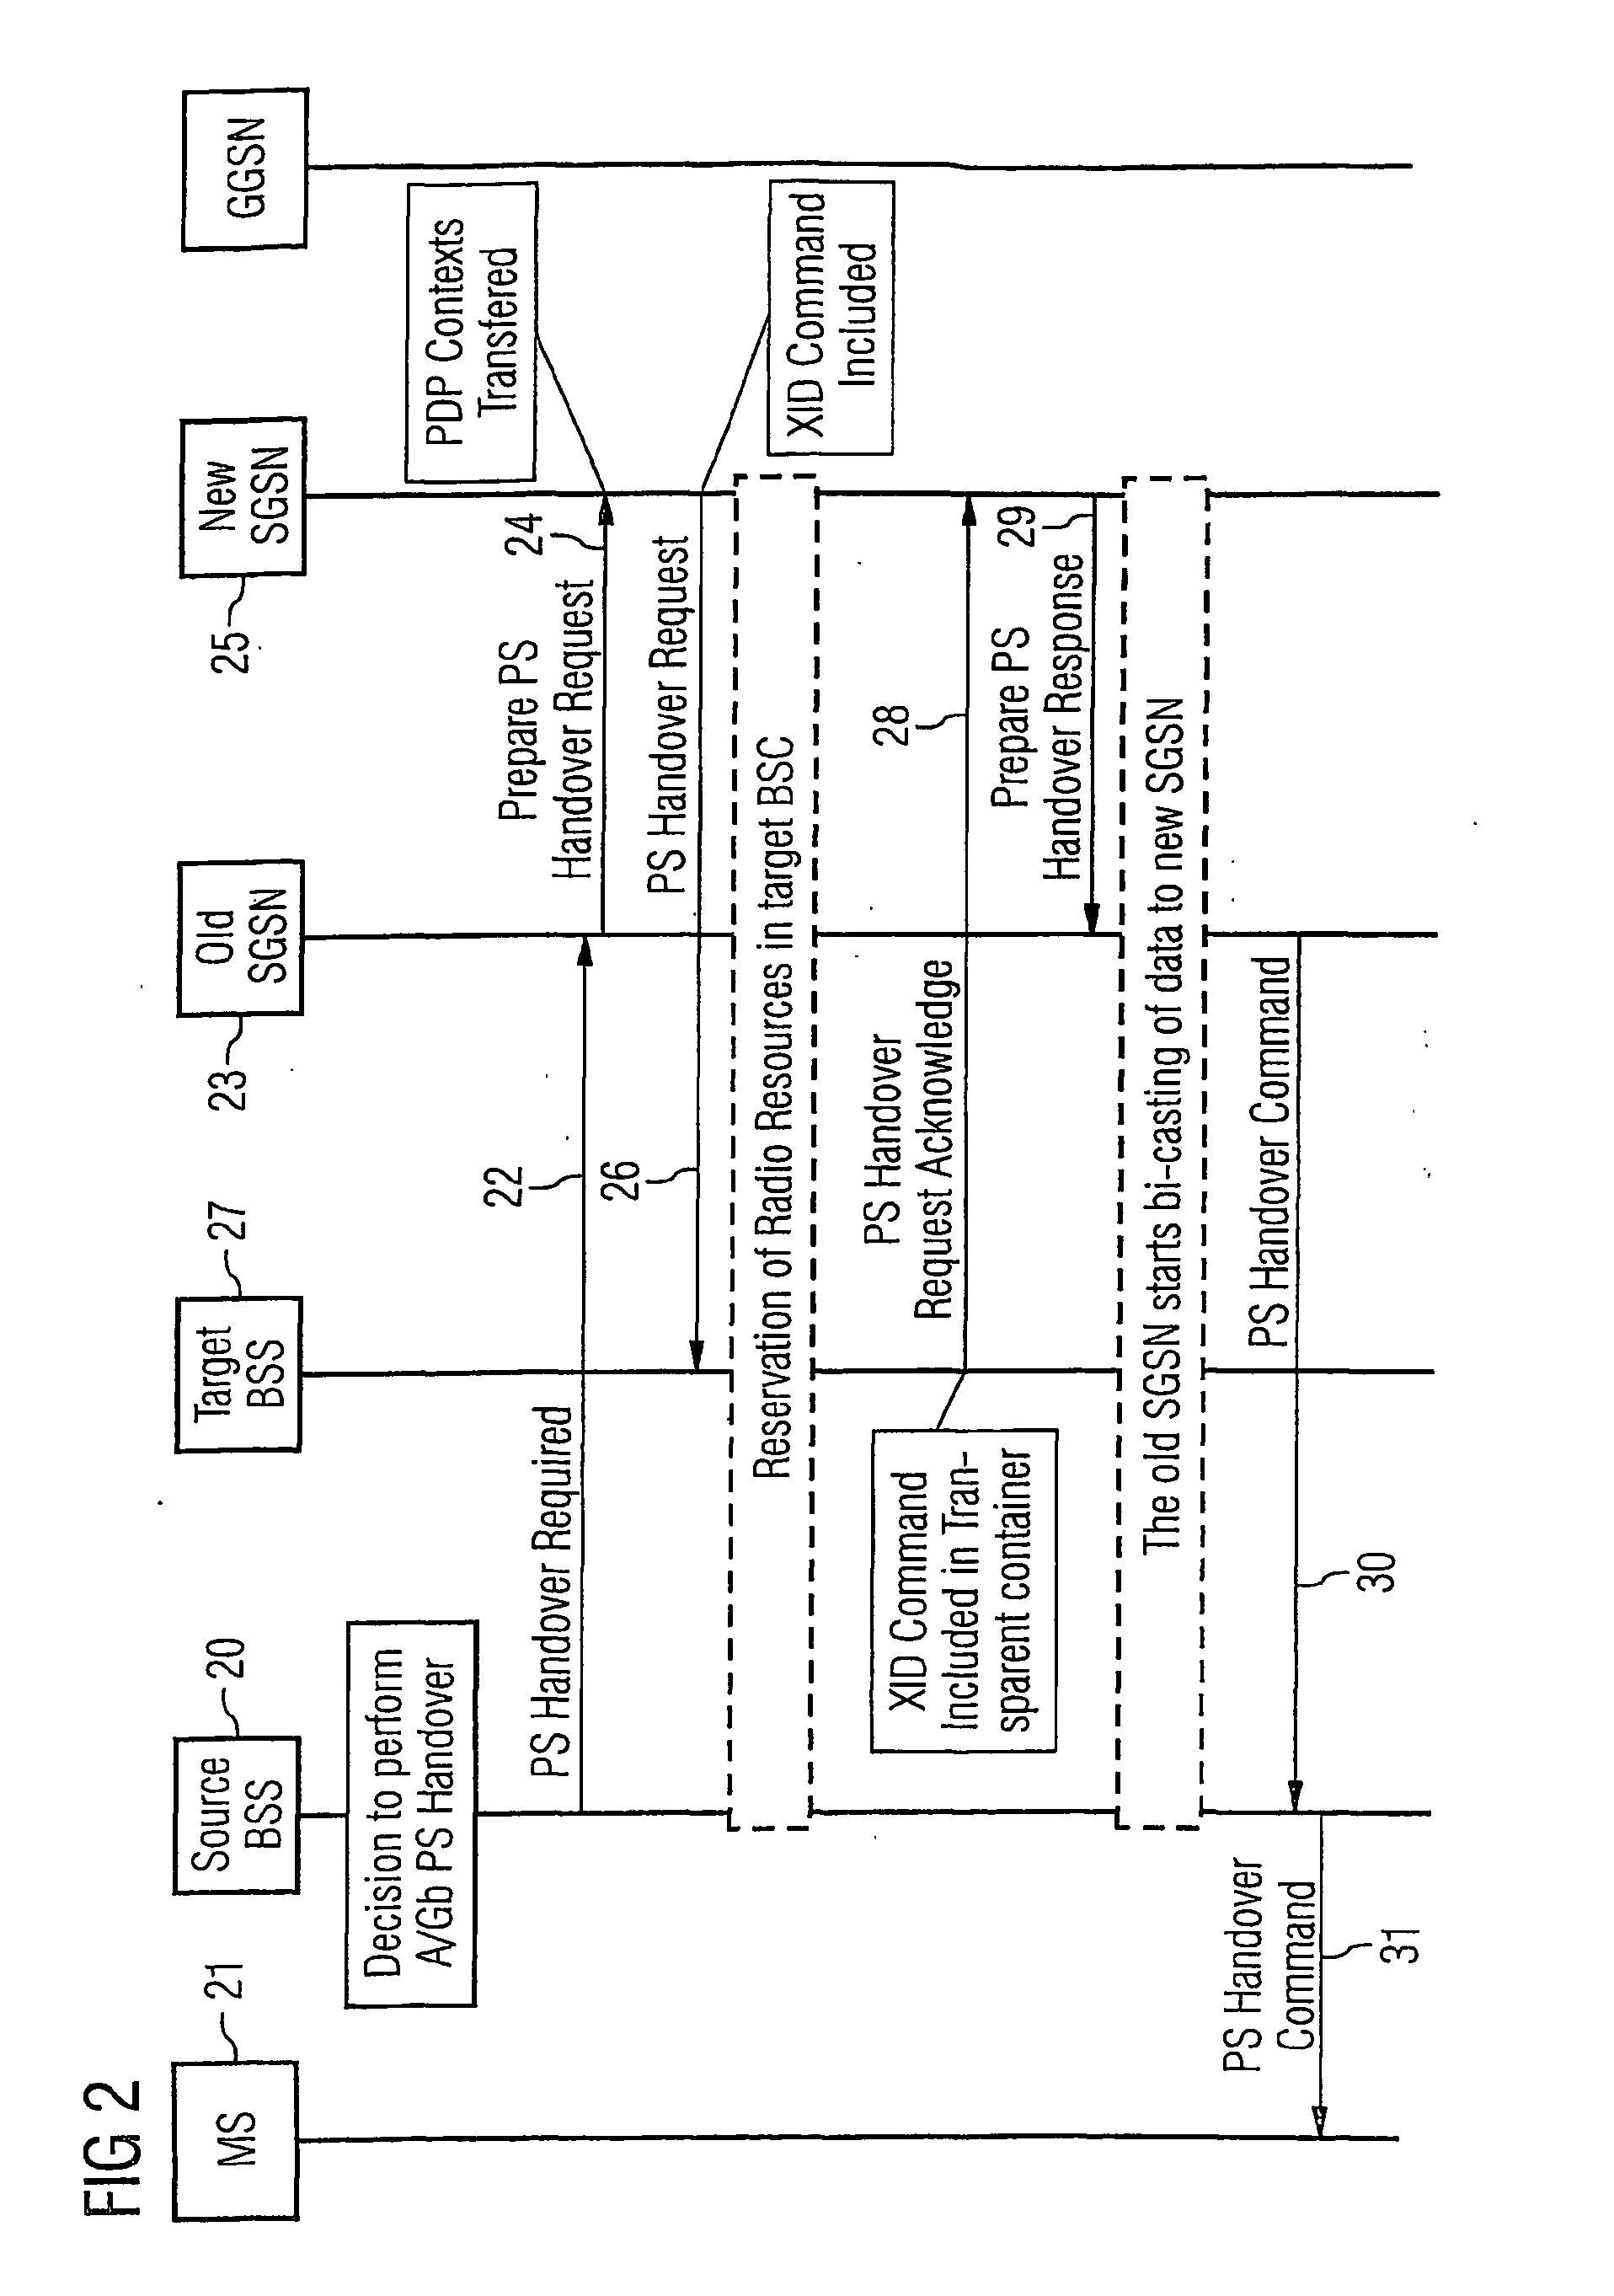 Method of Packet Switched Handover